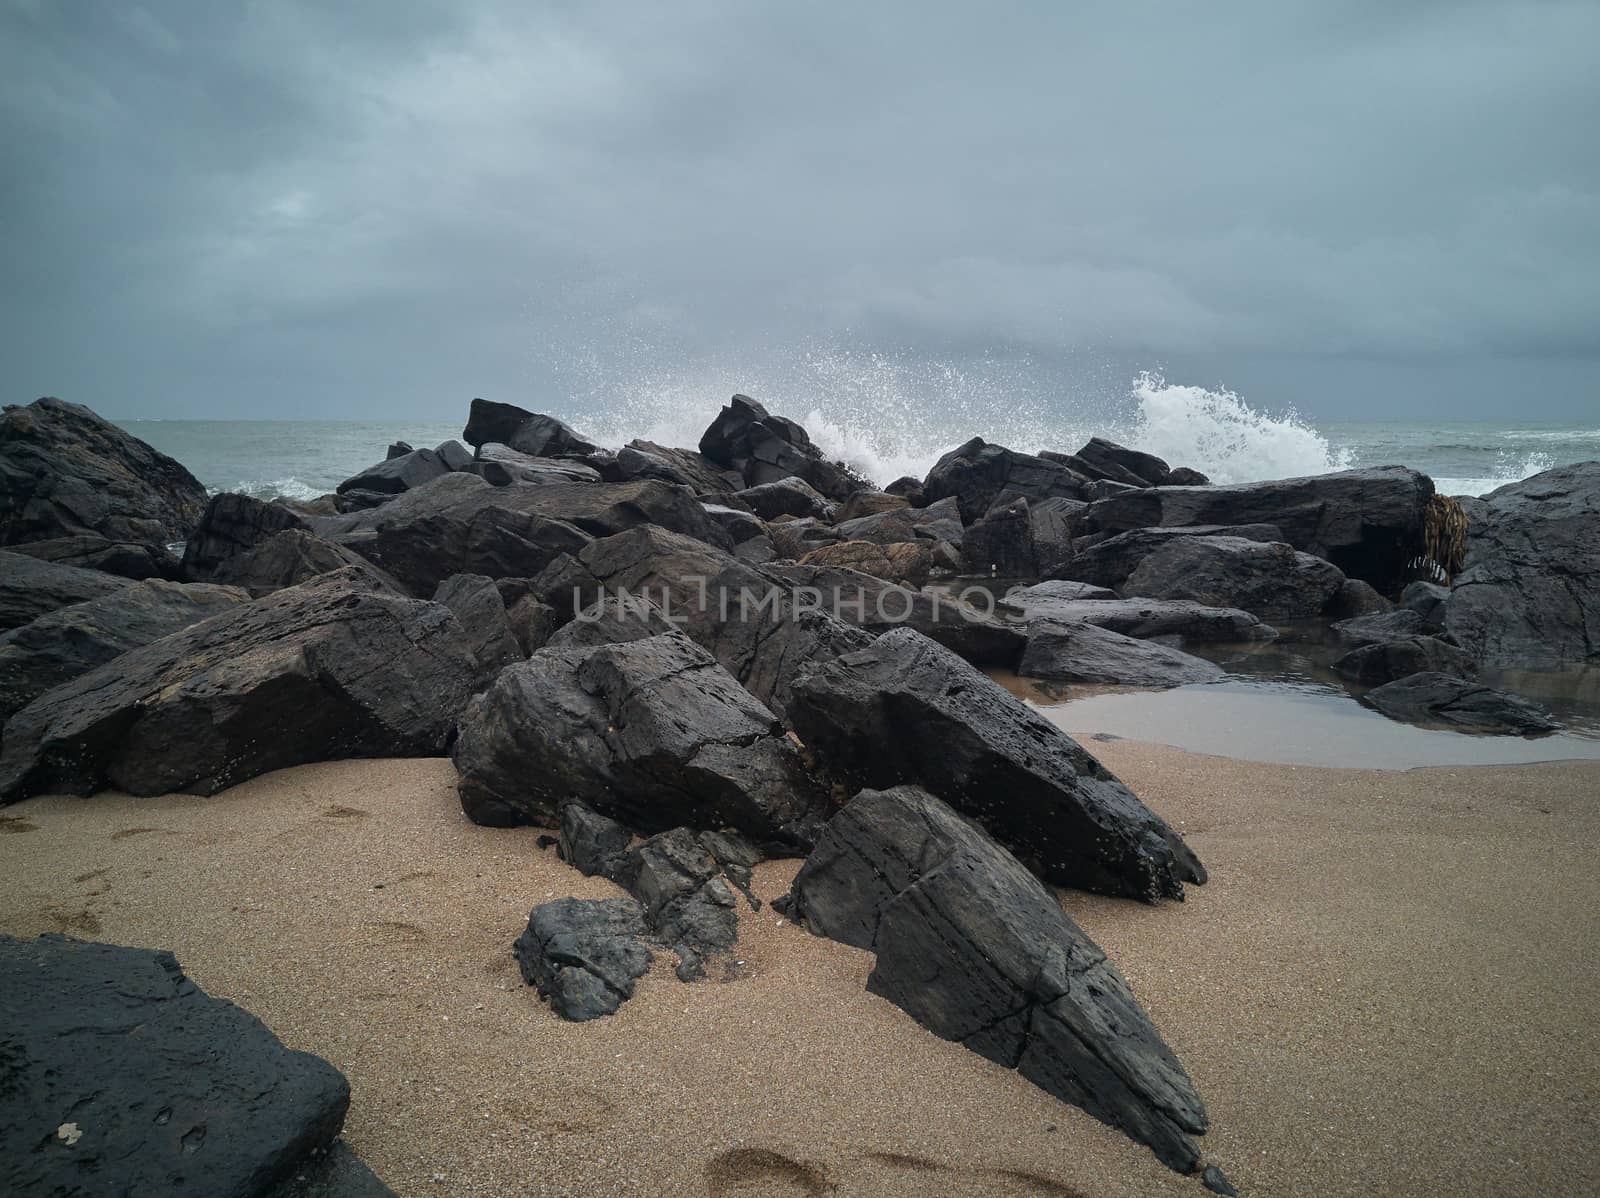 Rocks on the beach after the storm by raul_ruiz